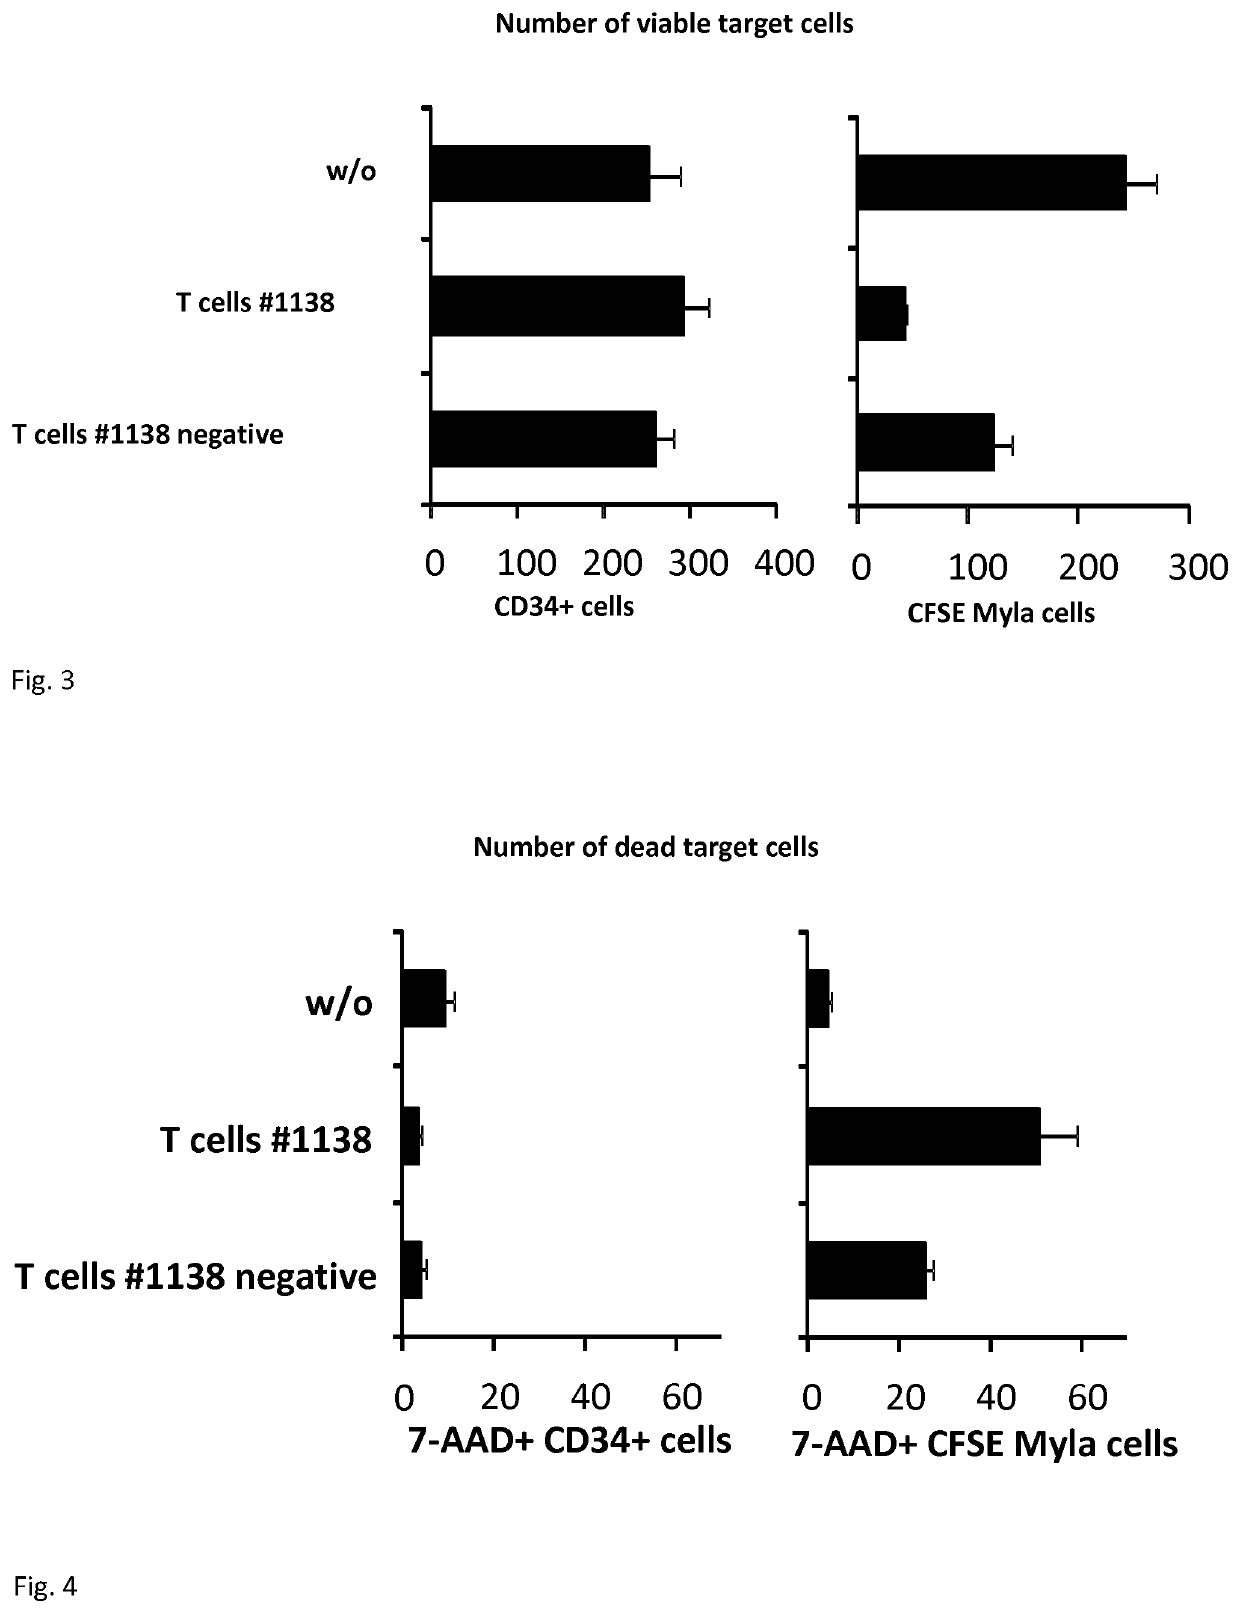 Anti CD30 chimeric antigen receptor and its use